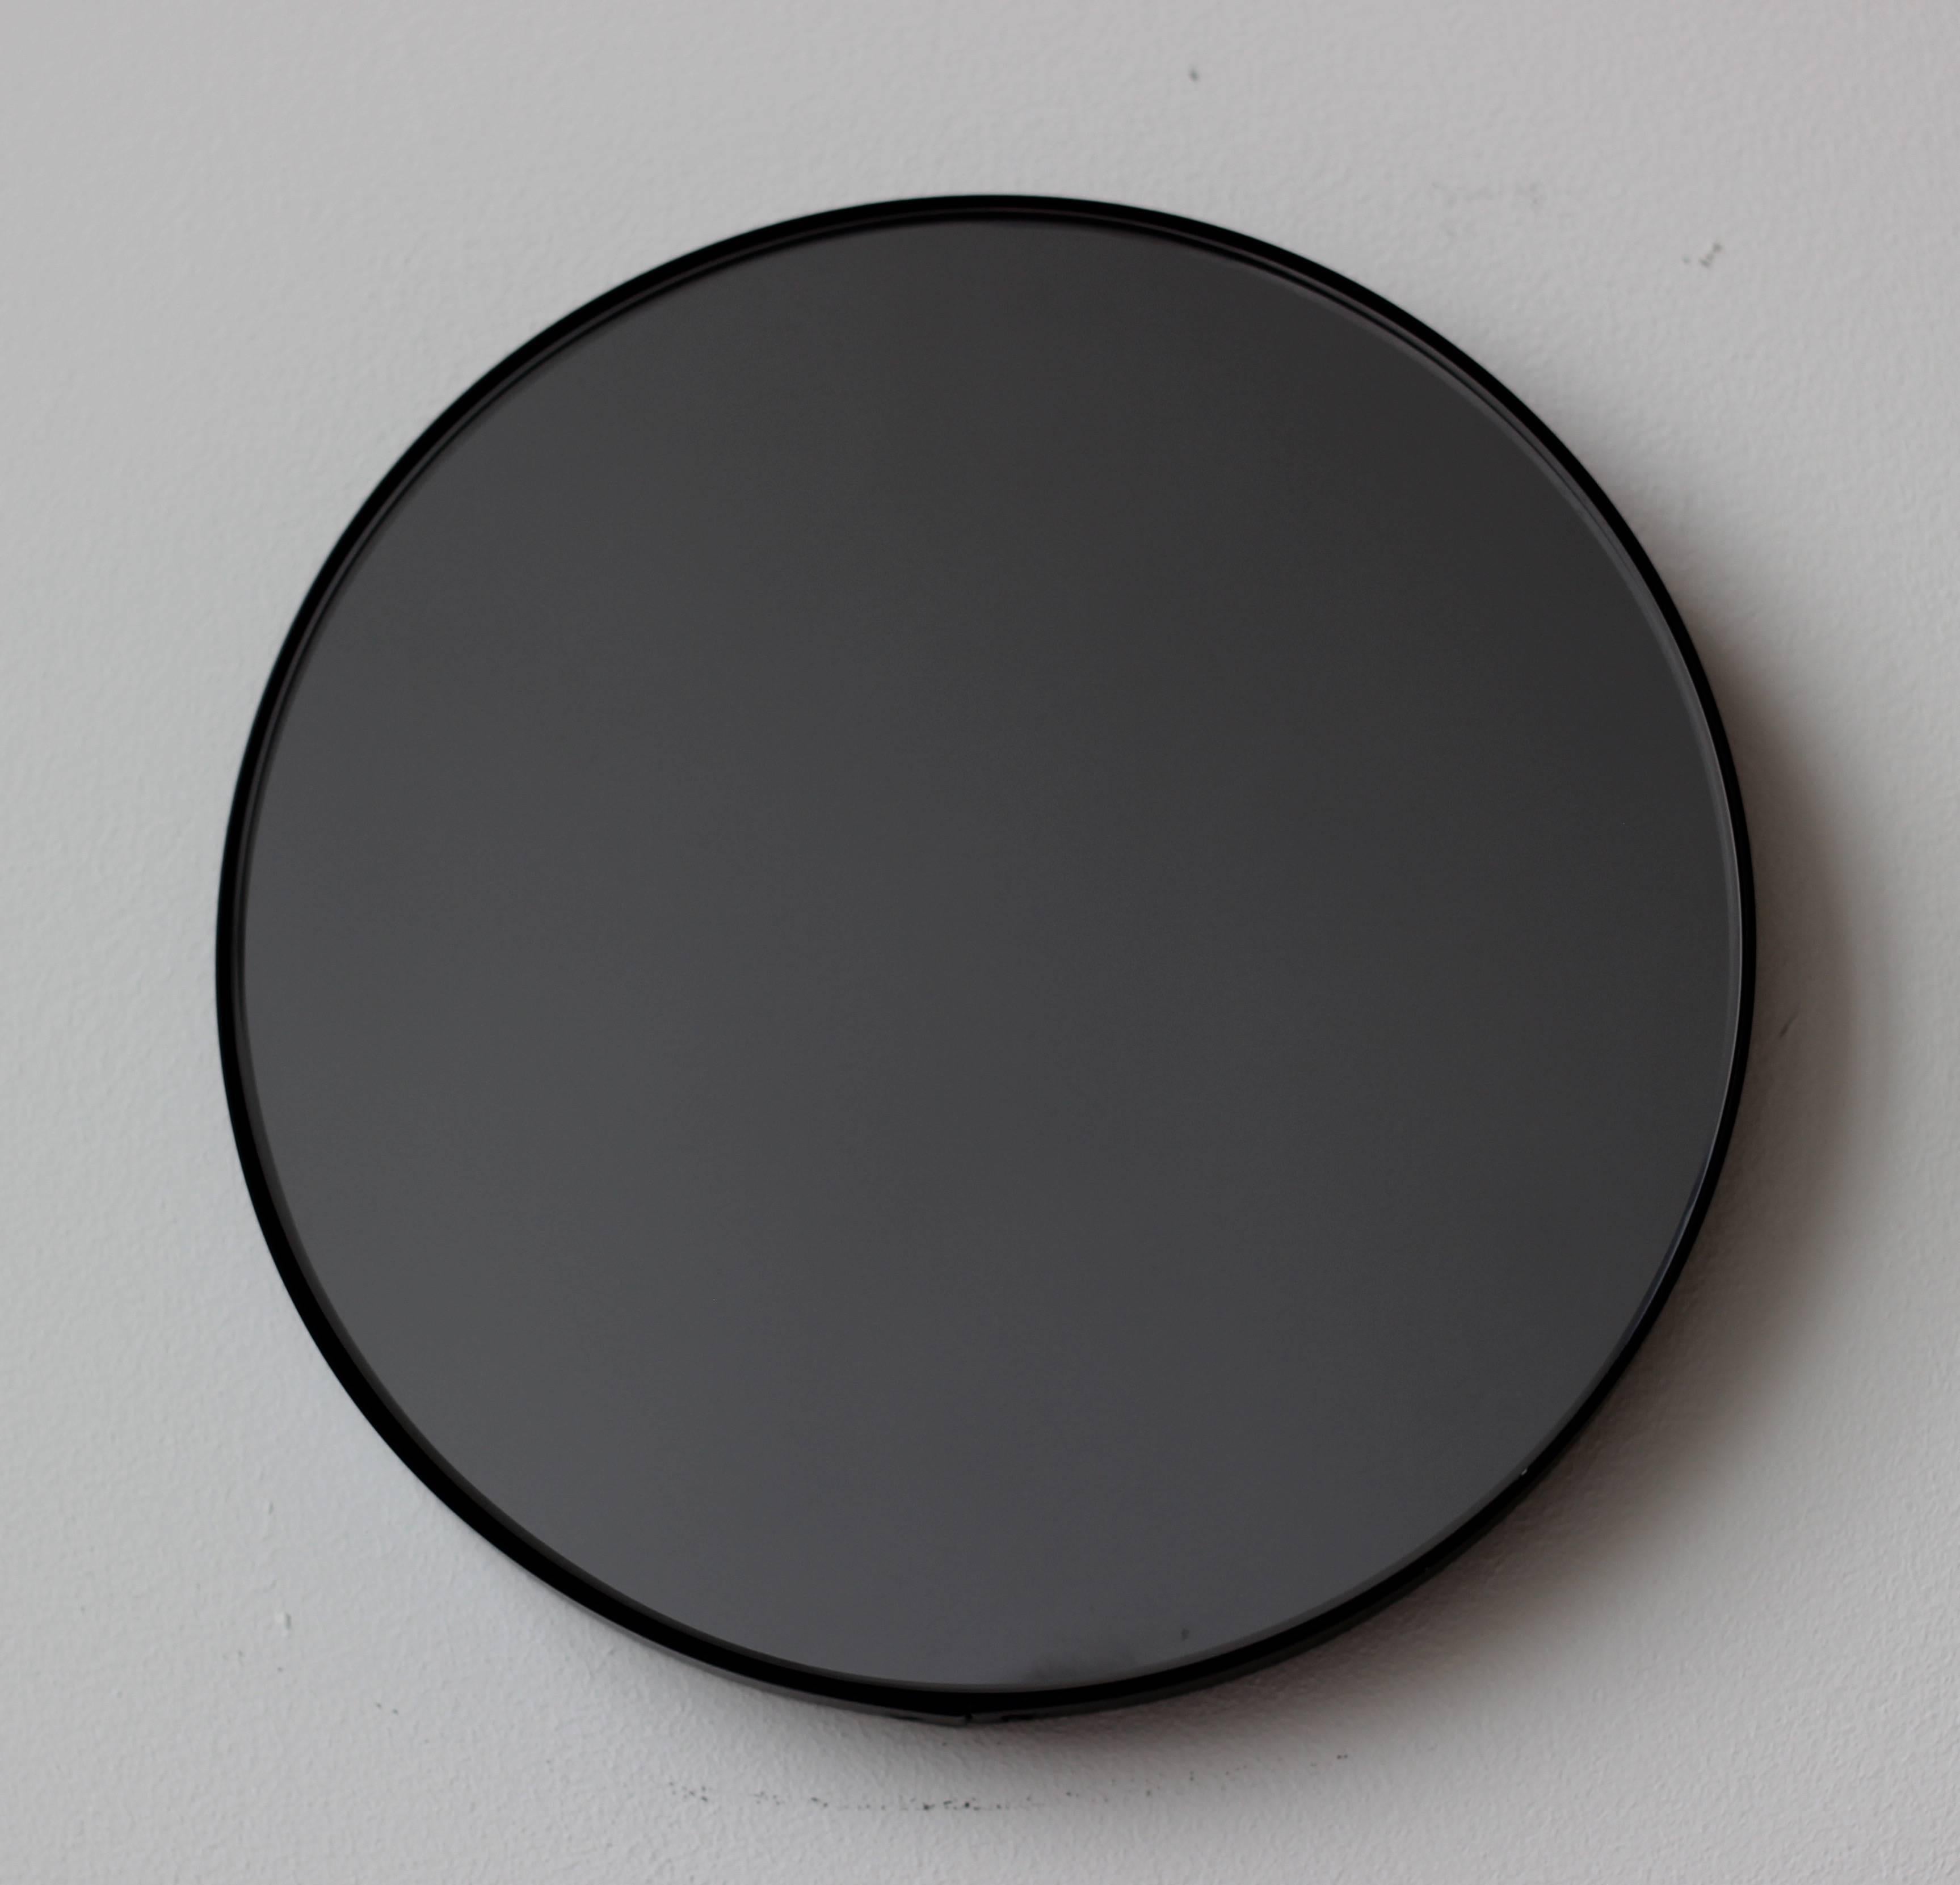 Contemporary Orbis™ round black tinted mirror with a minimalist aluminium powder coated black frame. Designed and handcrafted in London, UK.

Our mirrors are designed with an integrated French cleat (split batten) system that ensures the mirror is